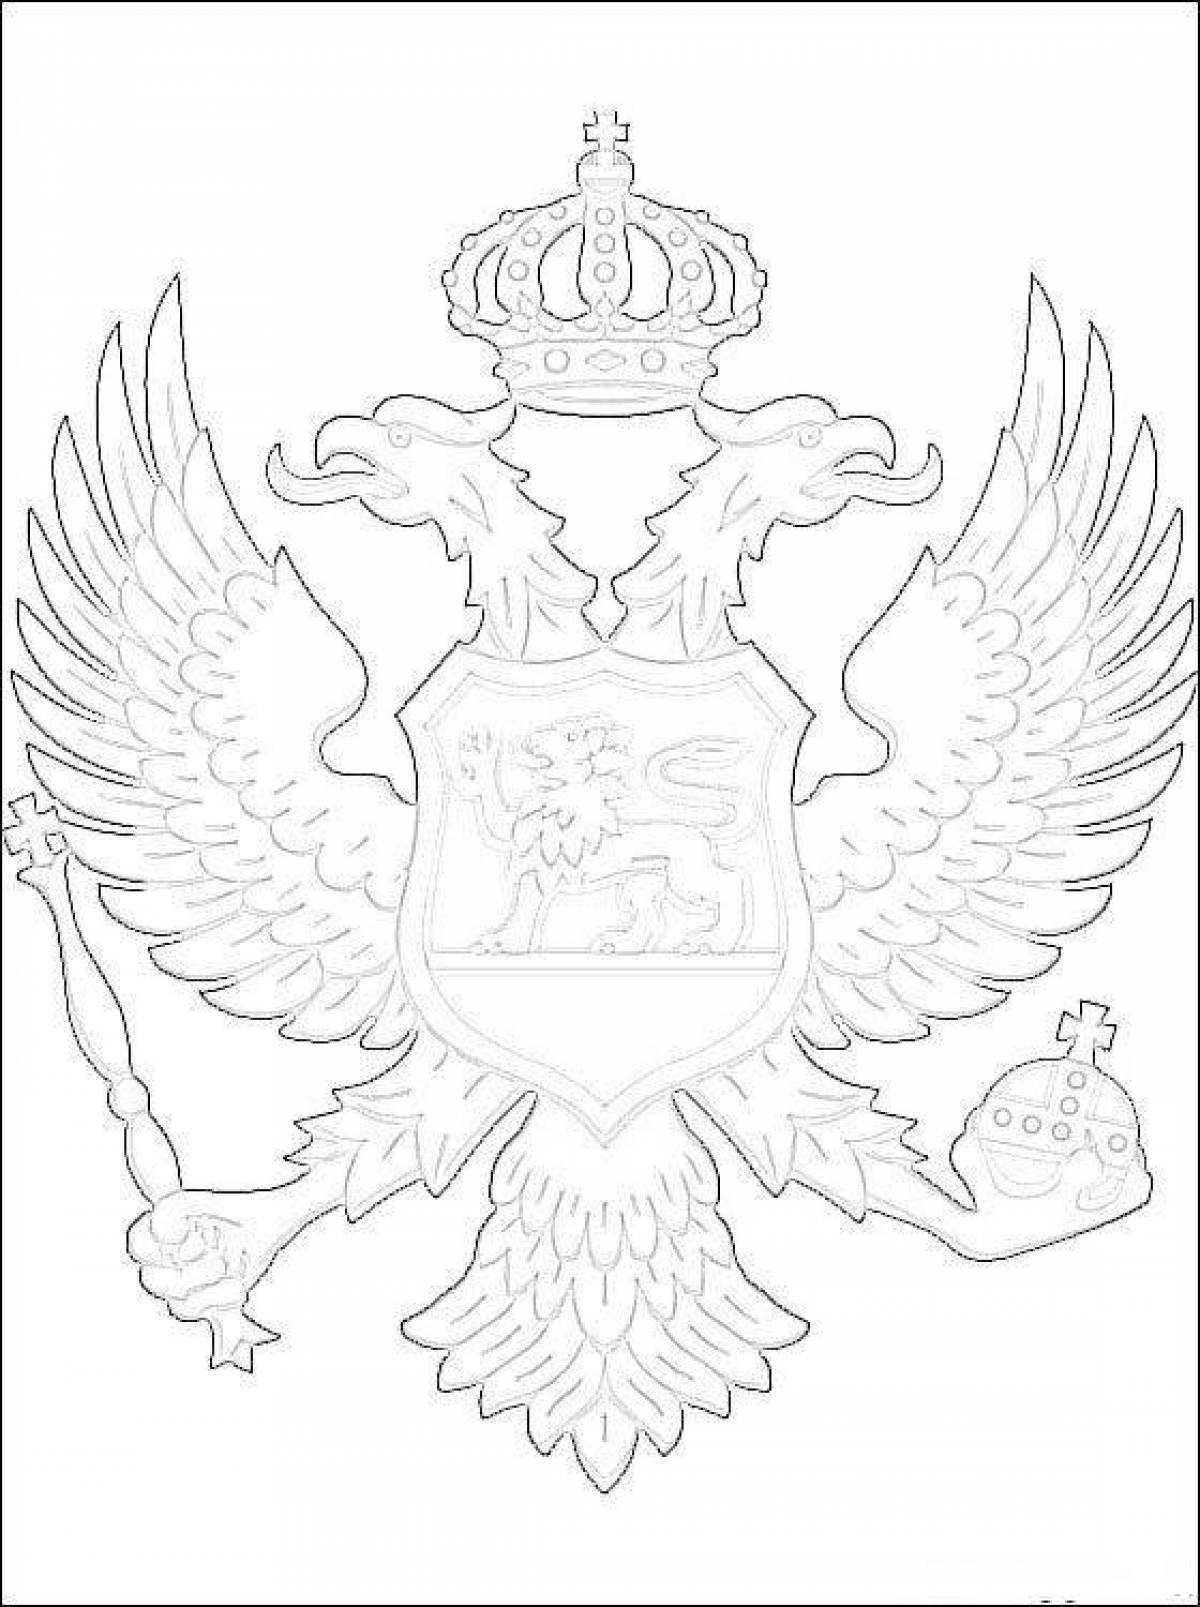 Royal coat of arms coloring